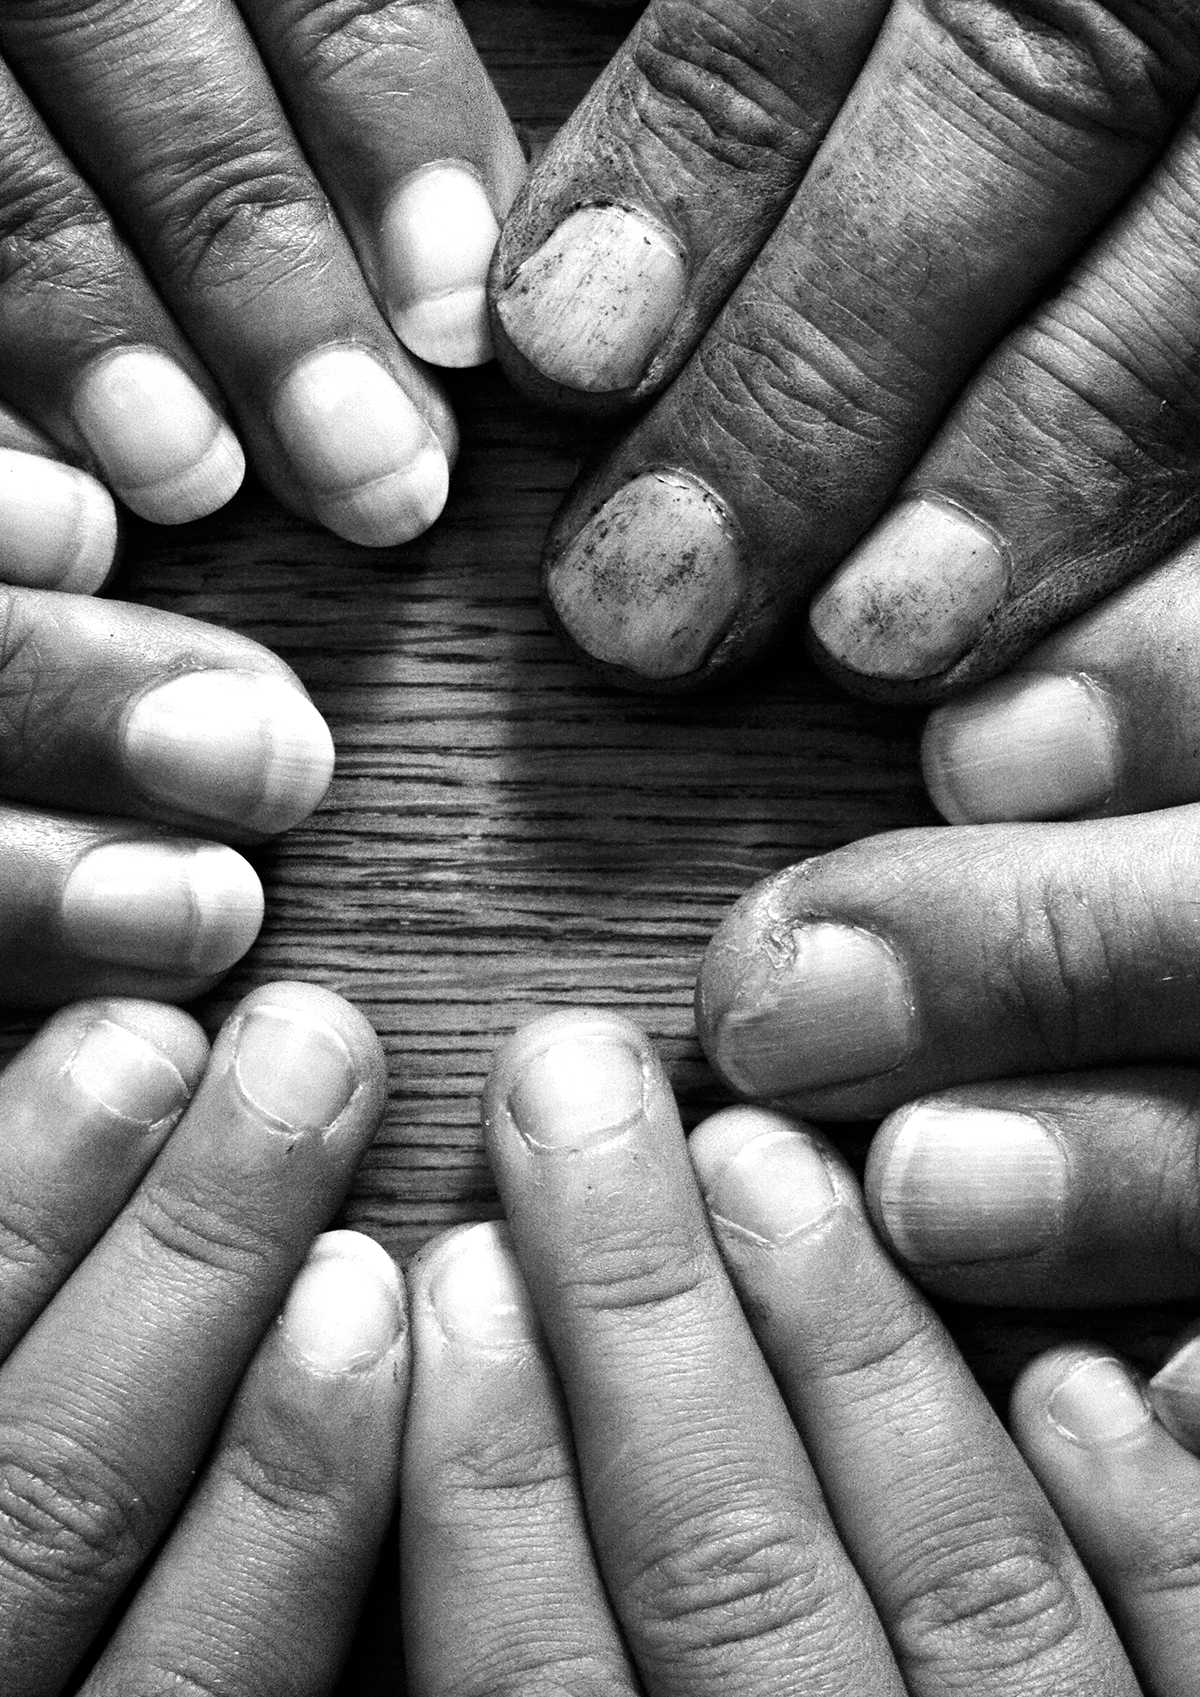 together hands unity family intimacy Character strength fingers suggesting body language body Human Form natural forms